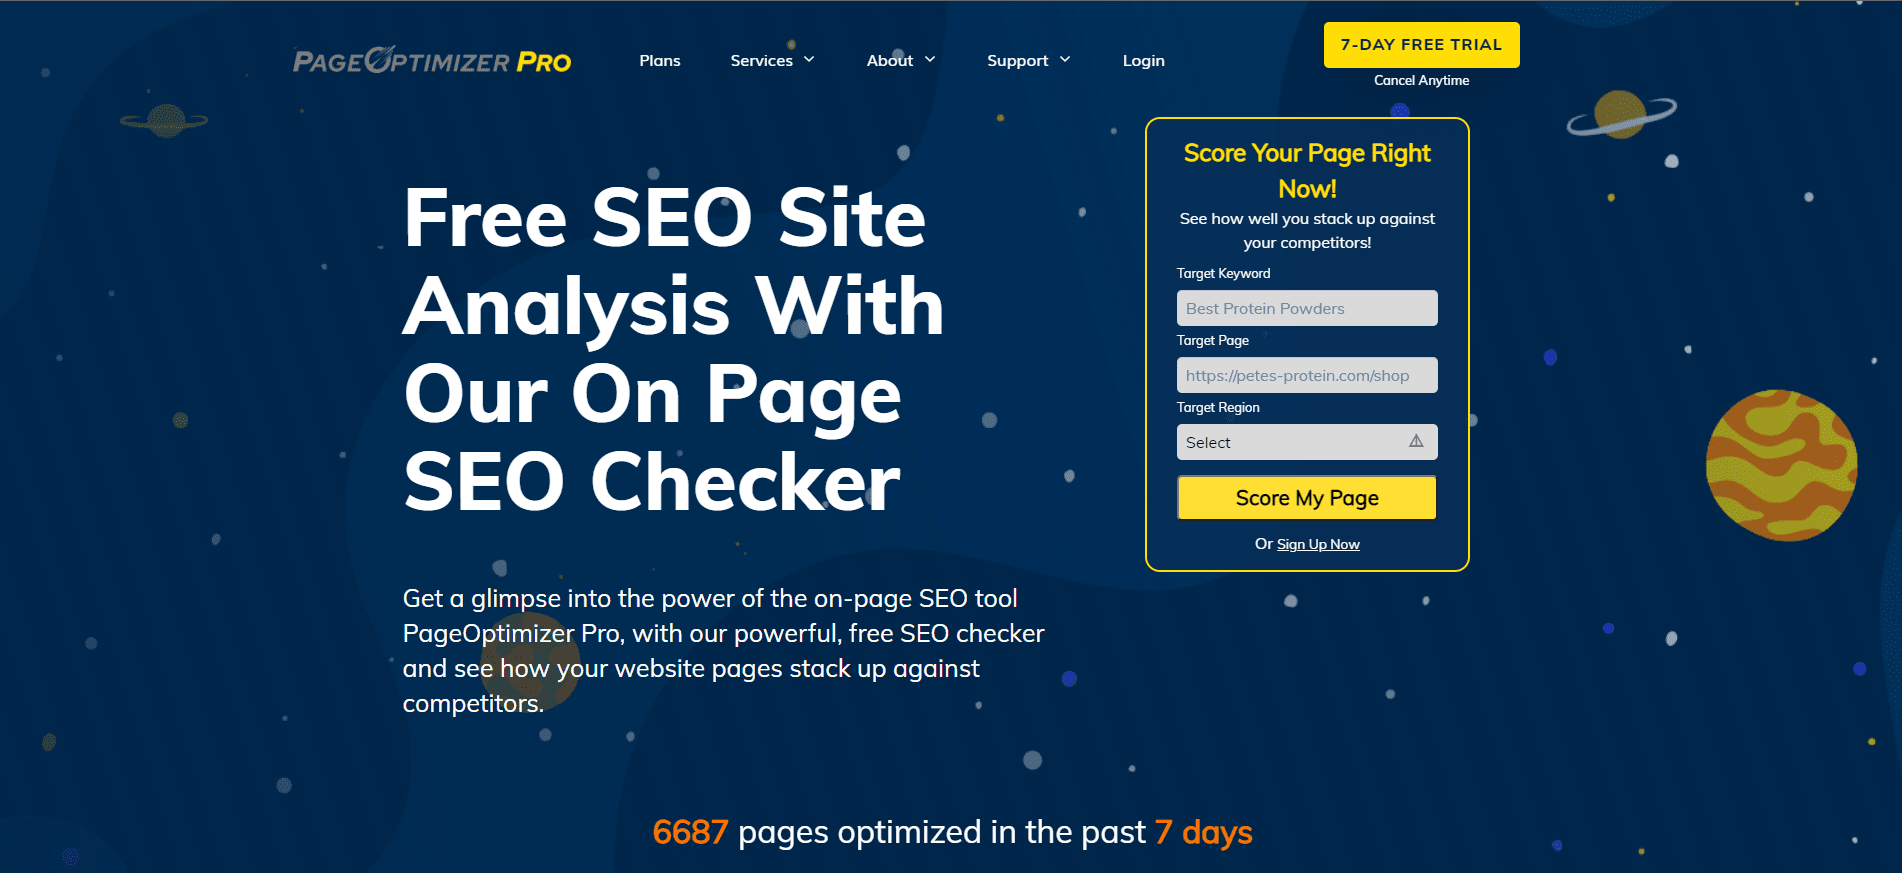 On Page SEO Checker - PageOptimizer Pro Review